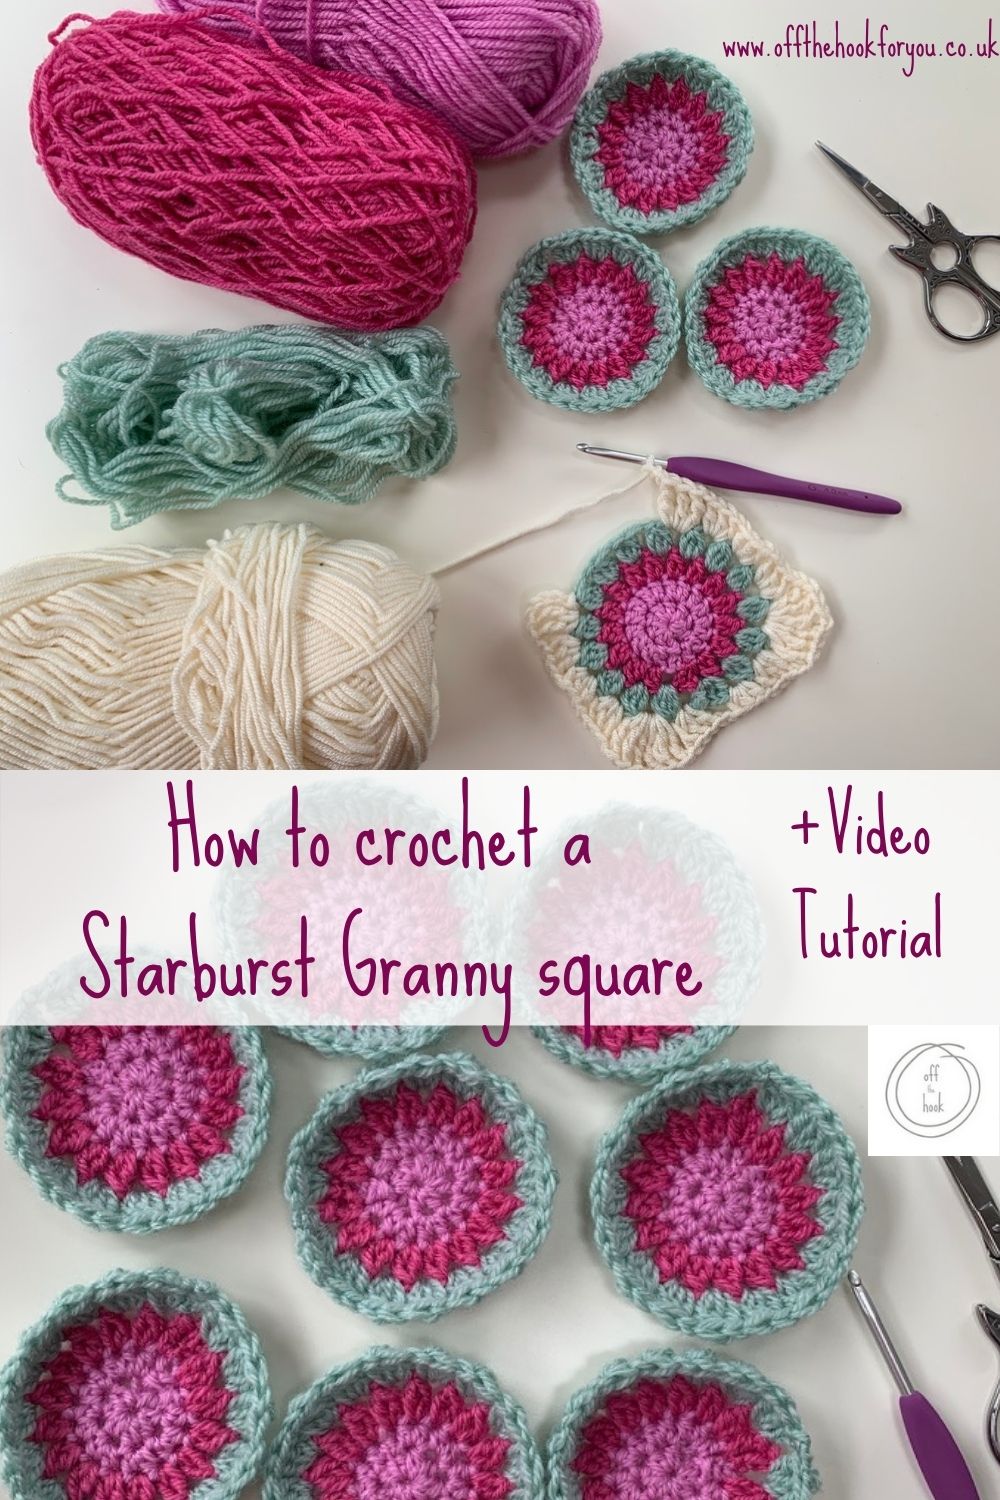 How to crochet a starburst granny square